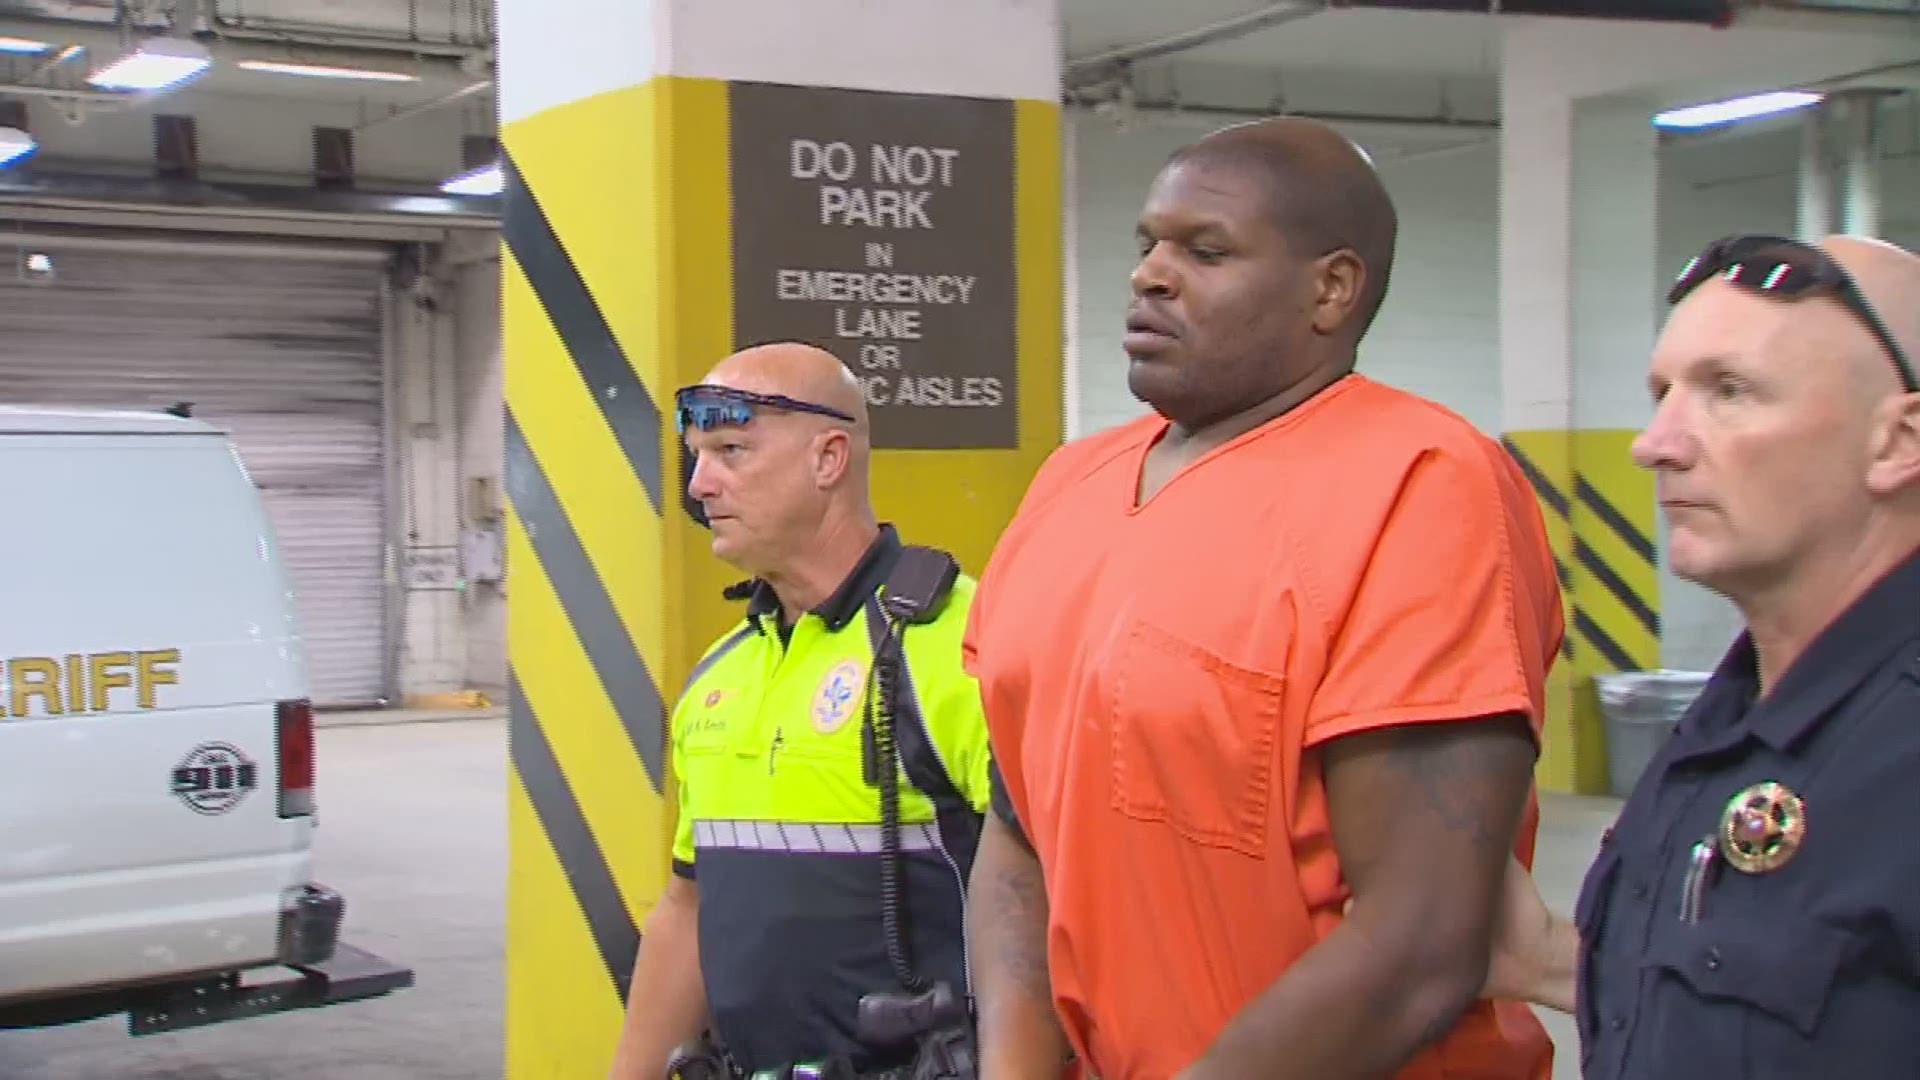 Former Dallas Cowboys defensive tackle Josh Brent was tased and arrested by Coppell police Sunday. He was booked into the Dallas County jail on a felony charge of assault of a public servant and a misdemeanor charge of resisting arrest. He is held in lieu of $50,000 bail.